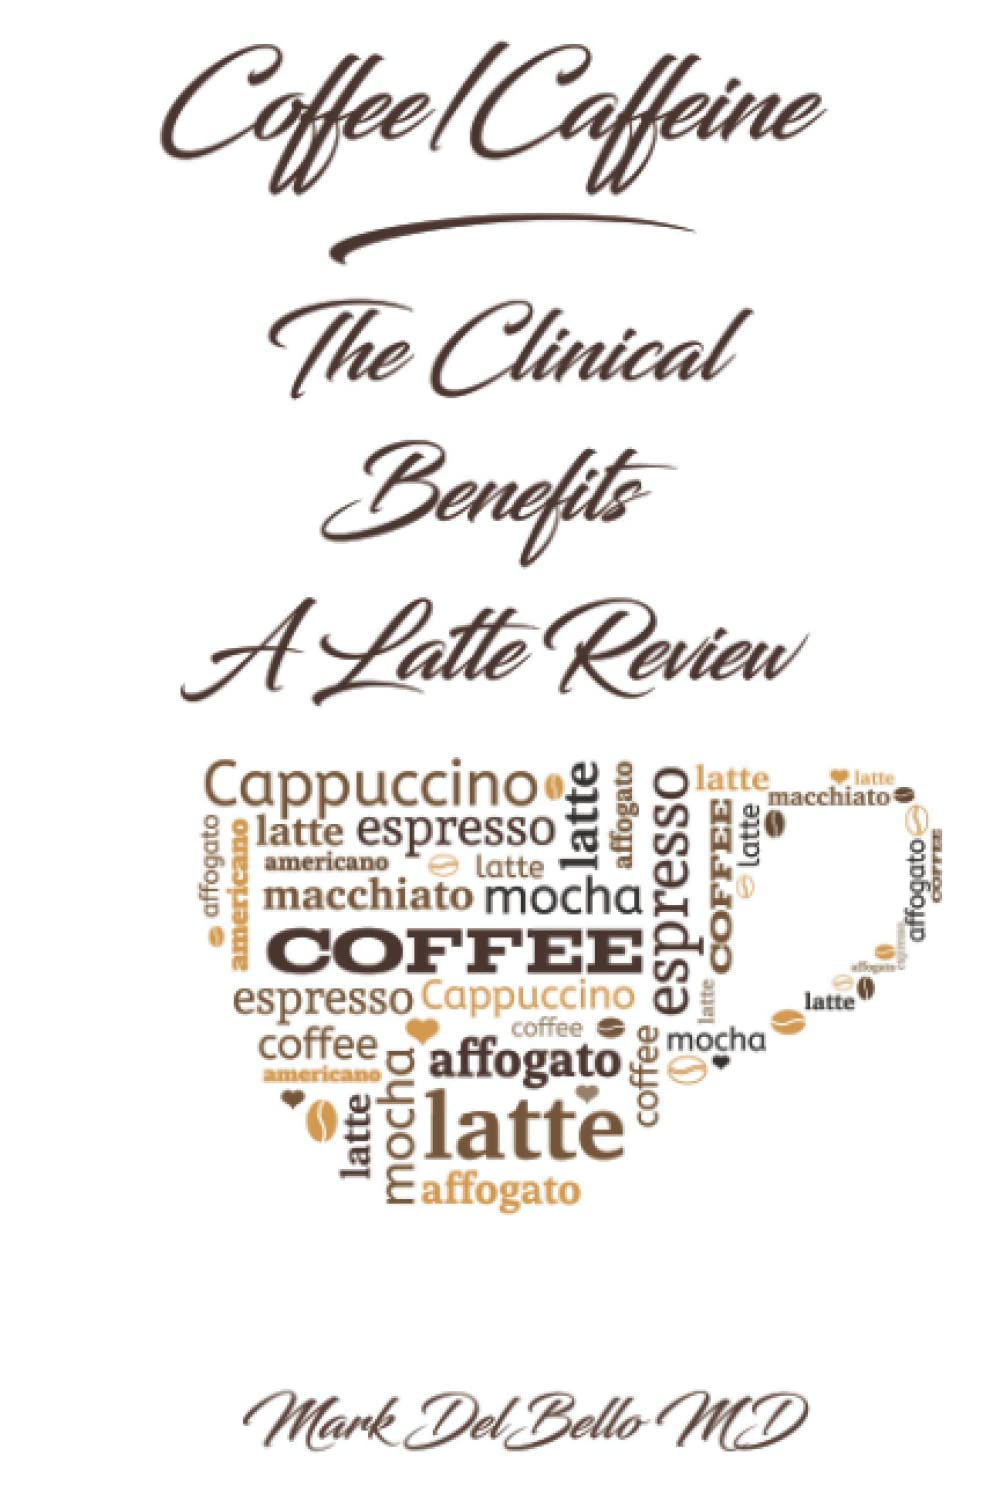 The Clinical Benefits of Caffeine - A Latte to Review